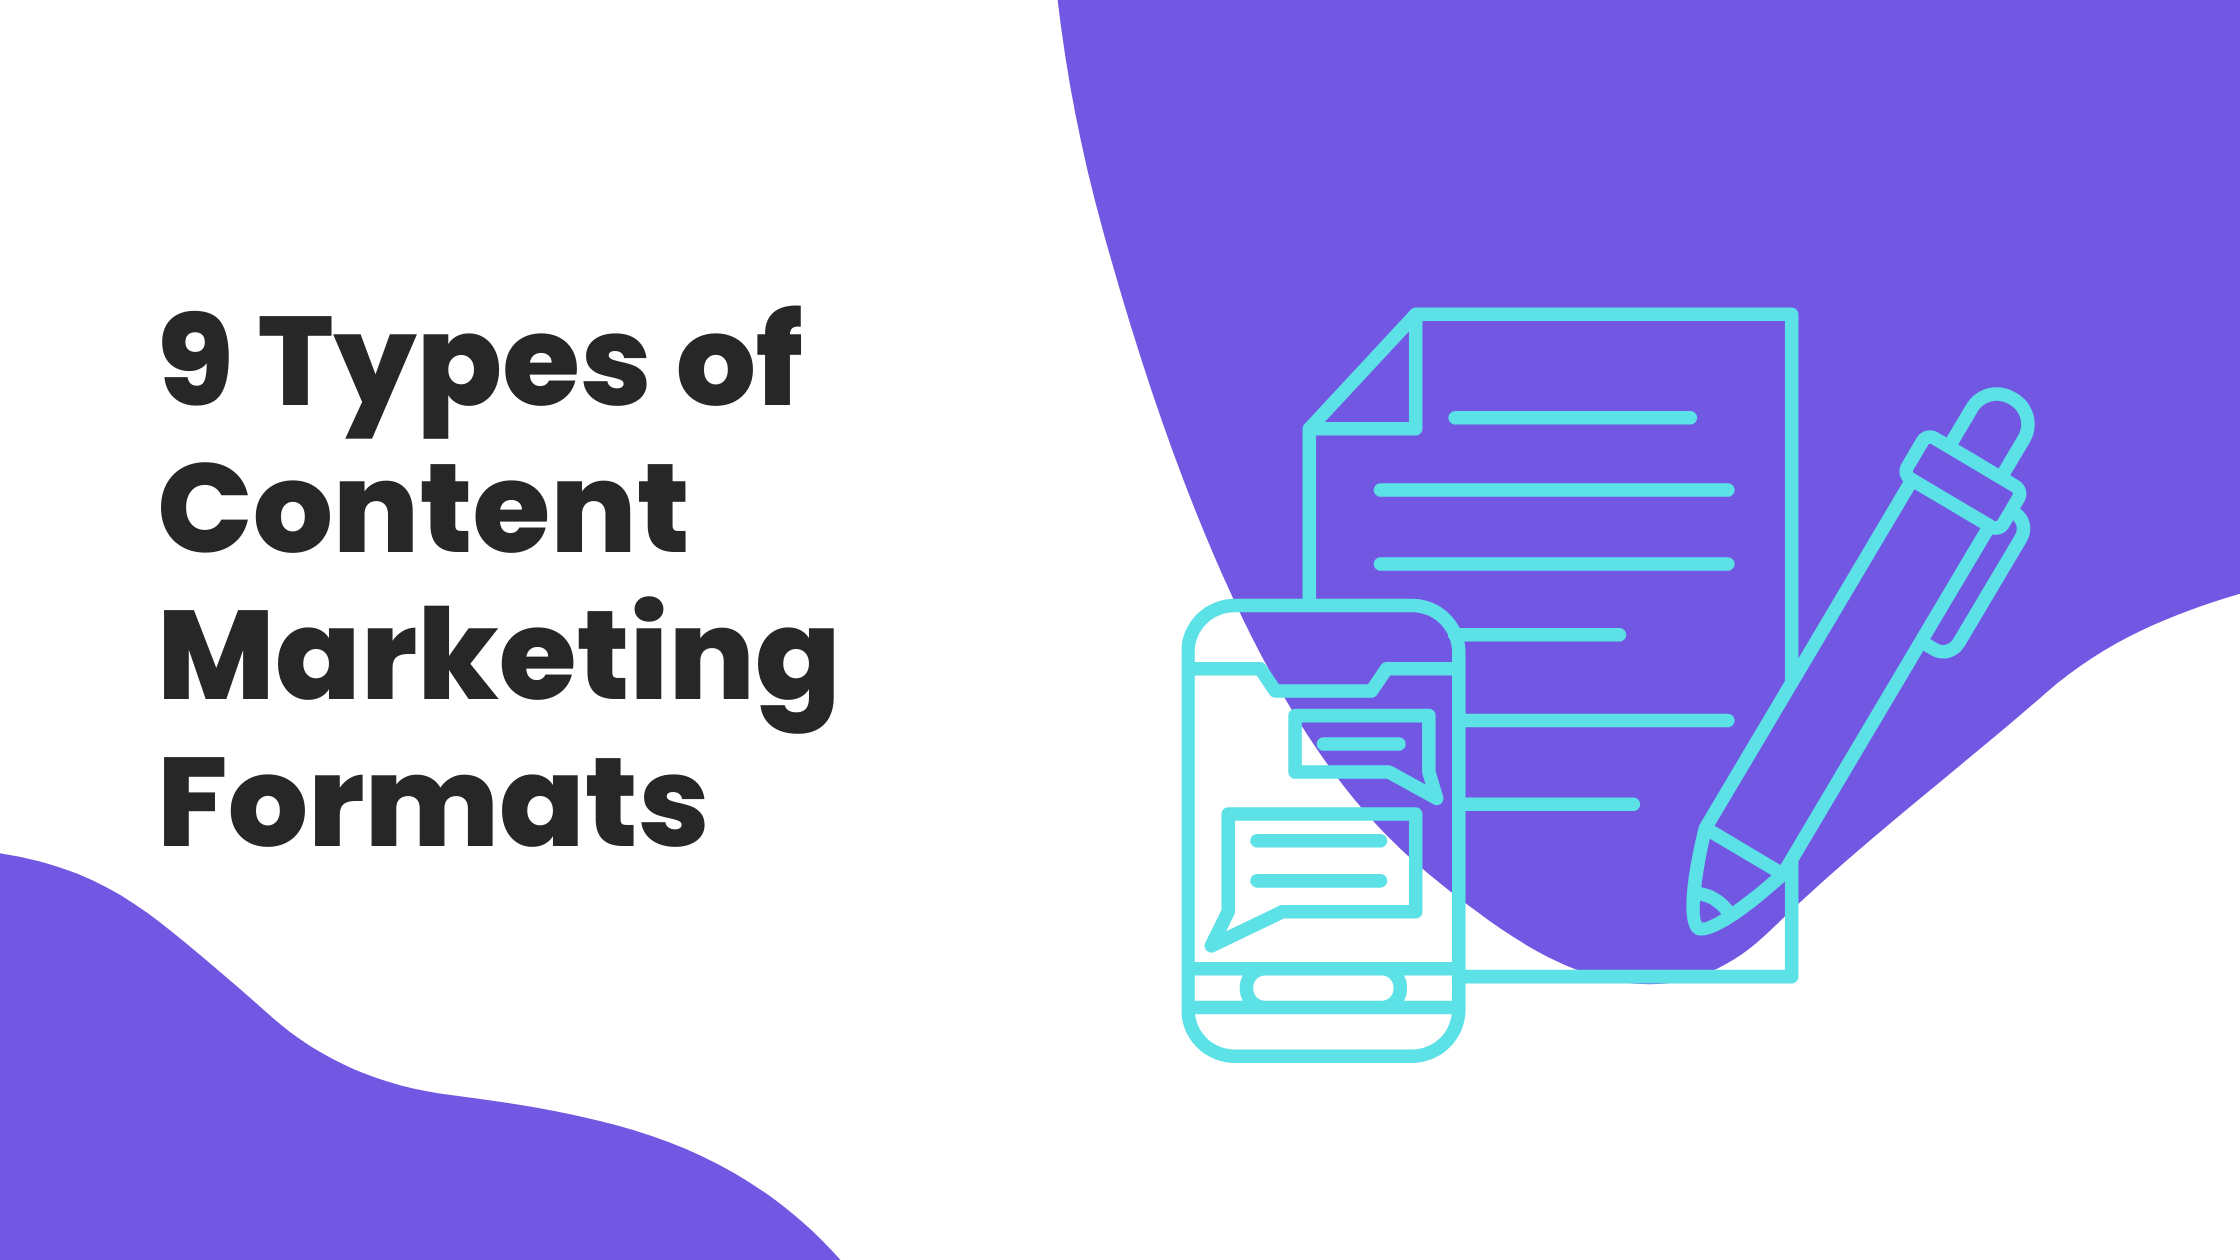 9 Types of Content Marketing Formats